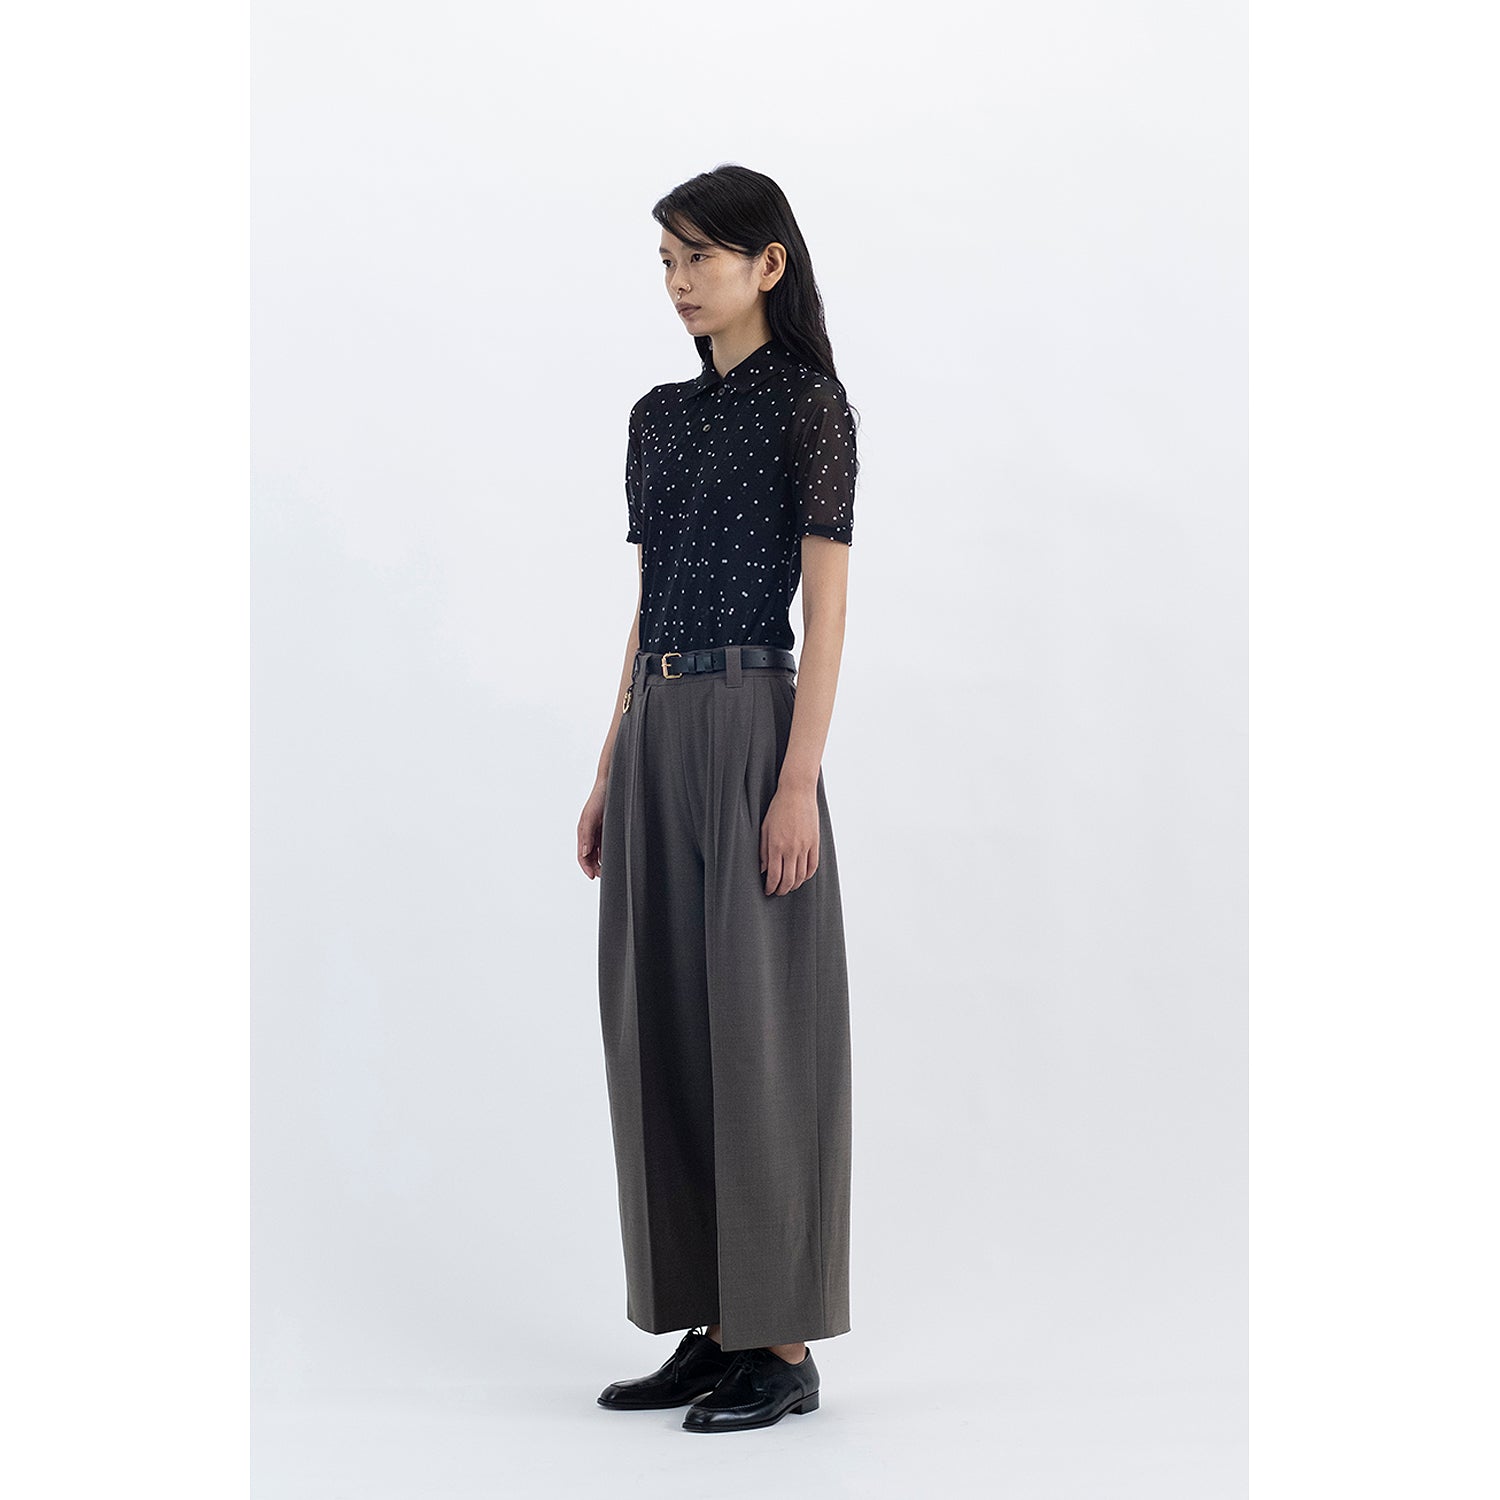 Extra Volumed Cropped Pants / brown